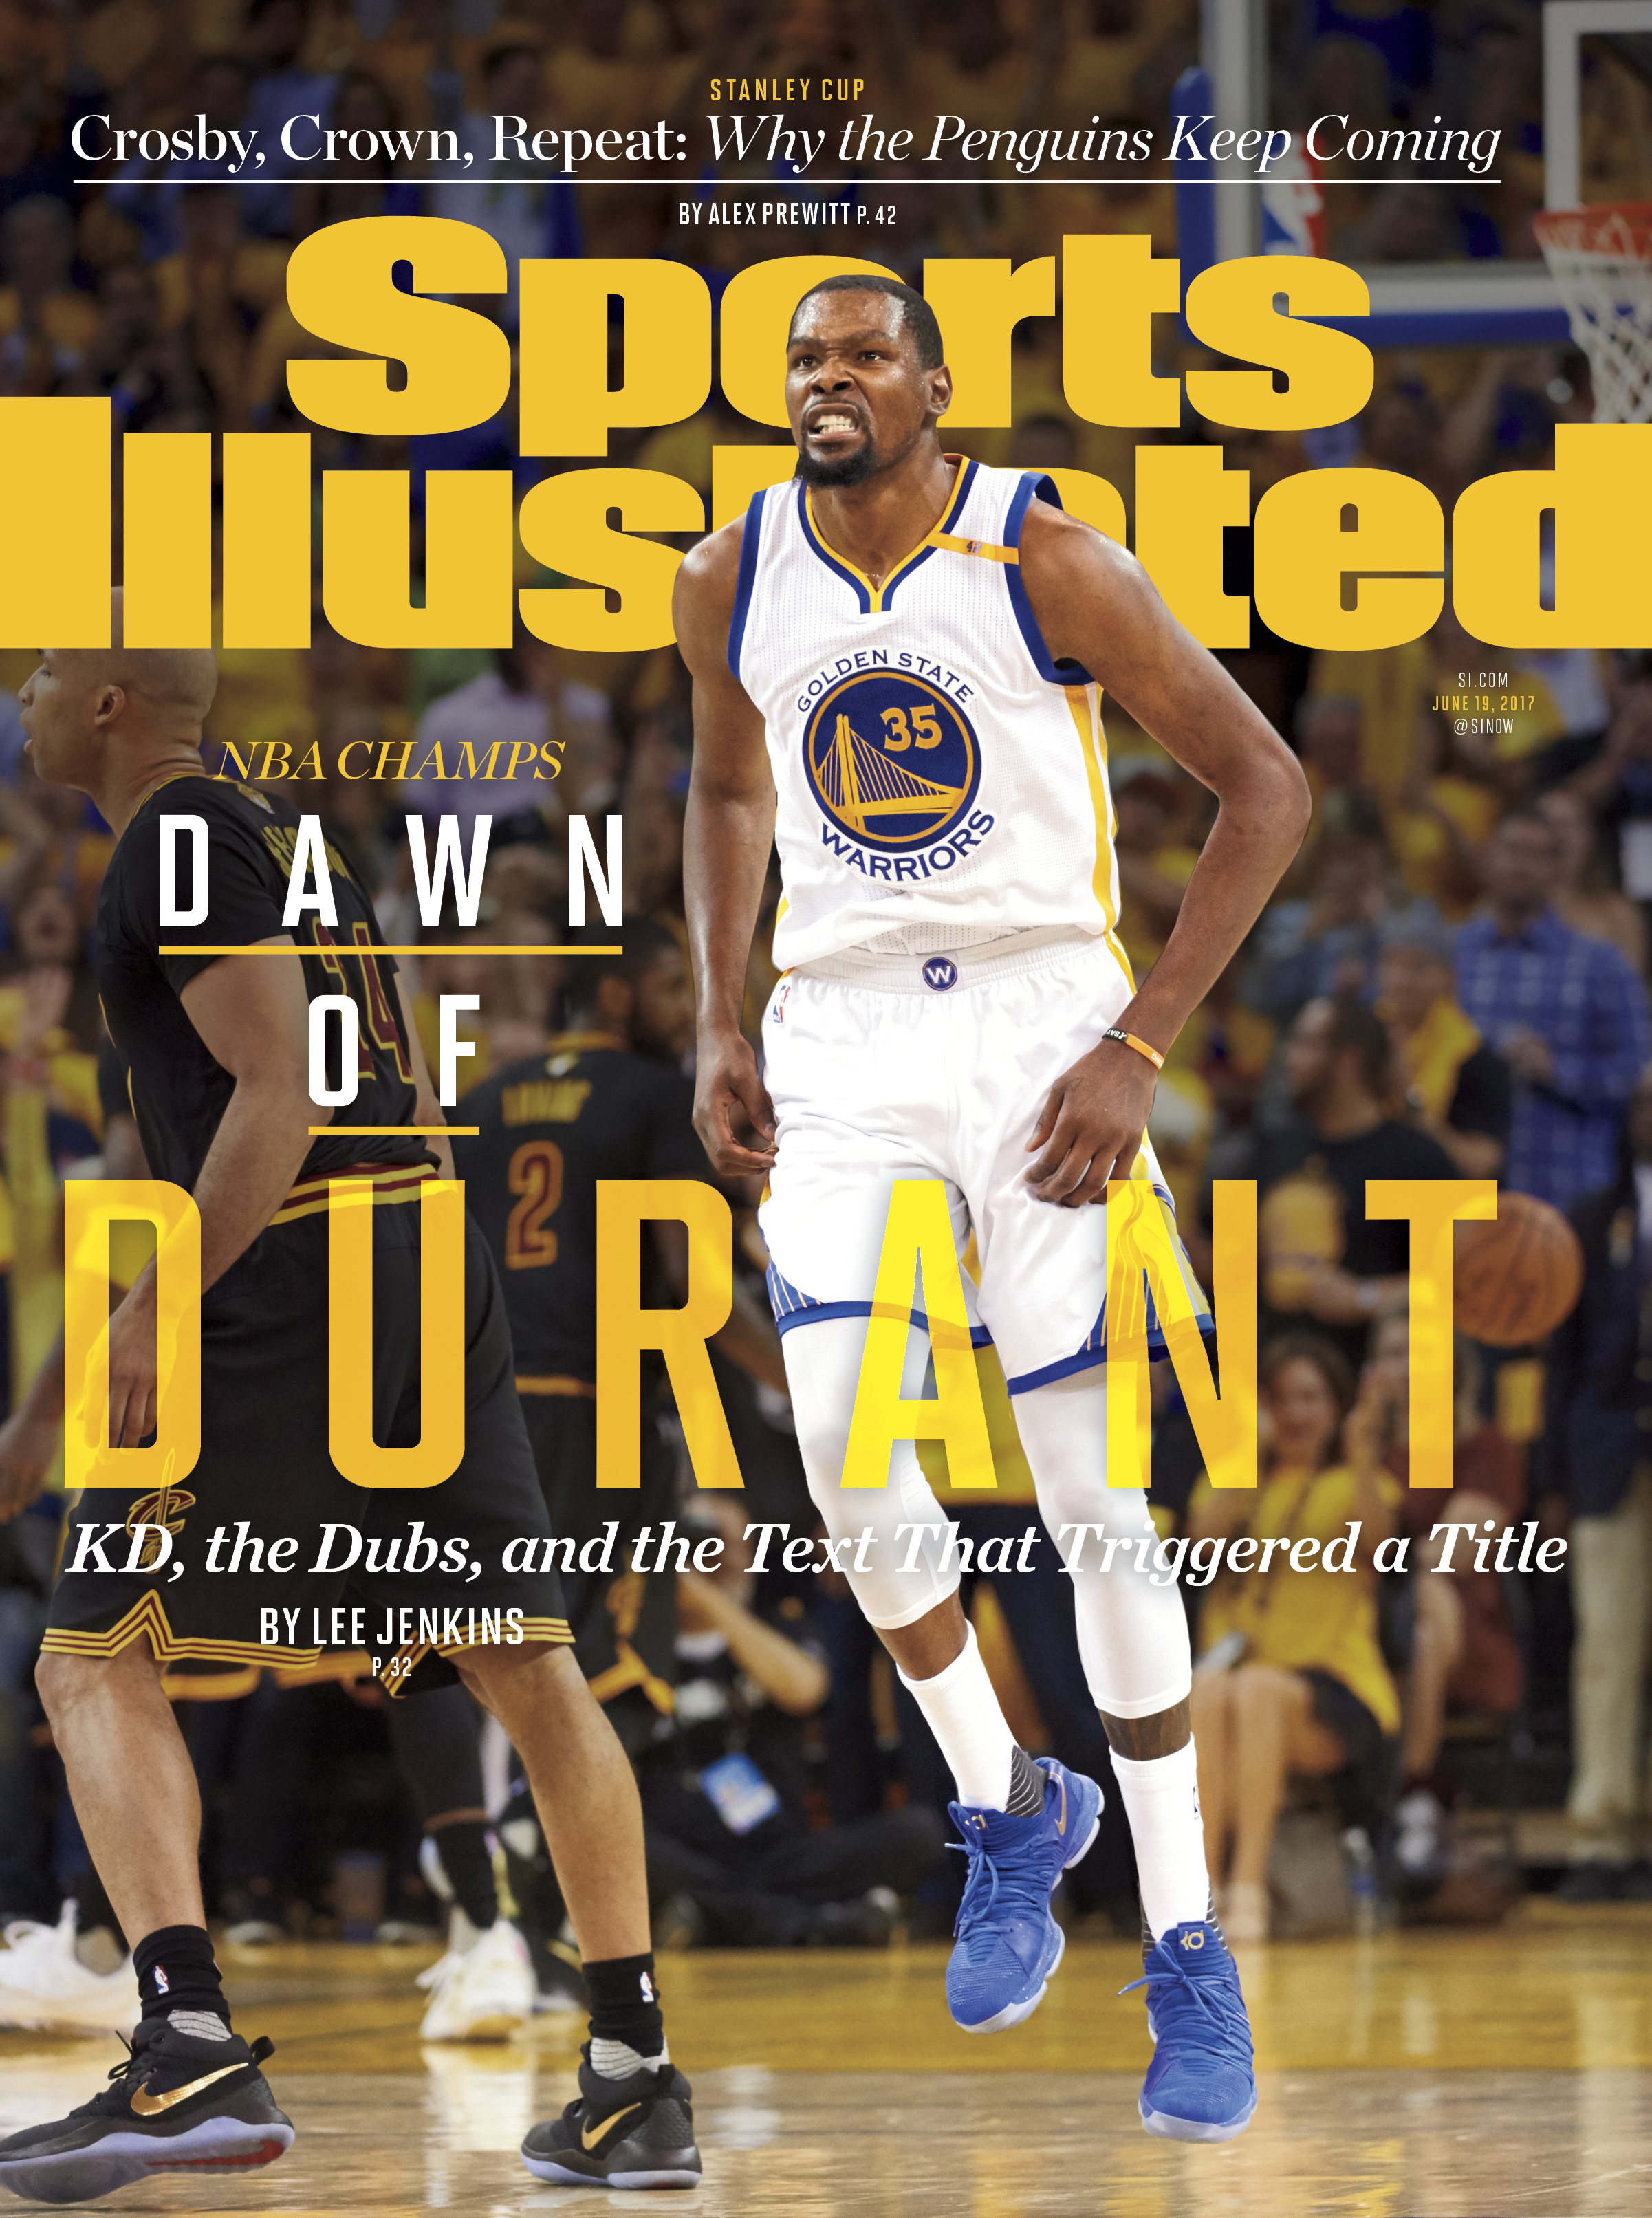 Kevin Durant graces latest Sports Illustrated cover2402 x 3225